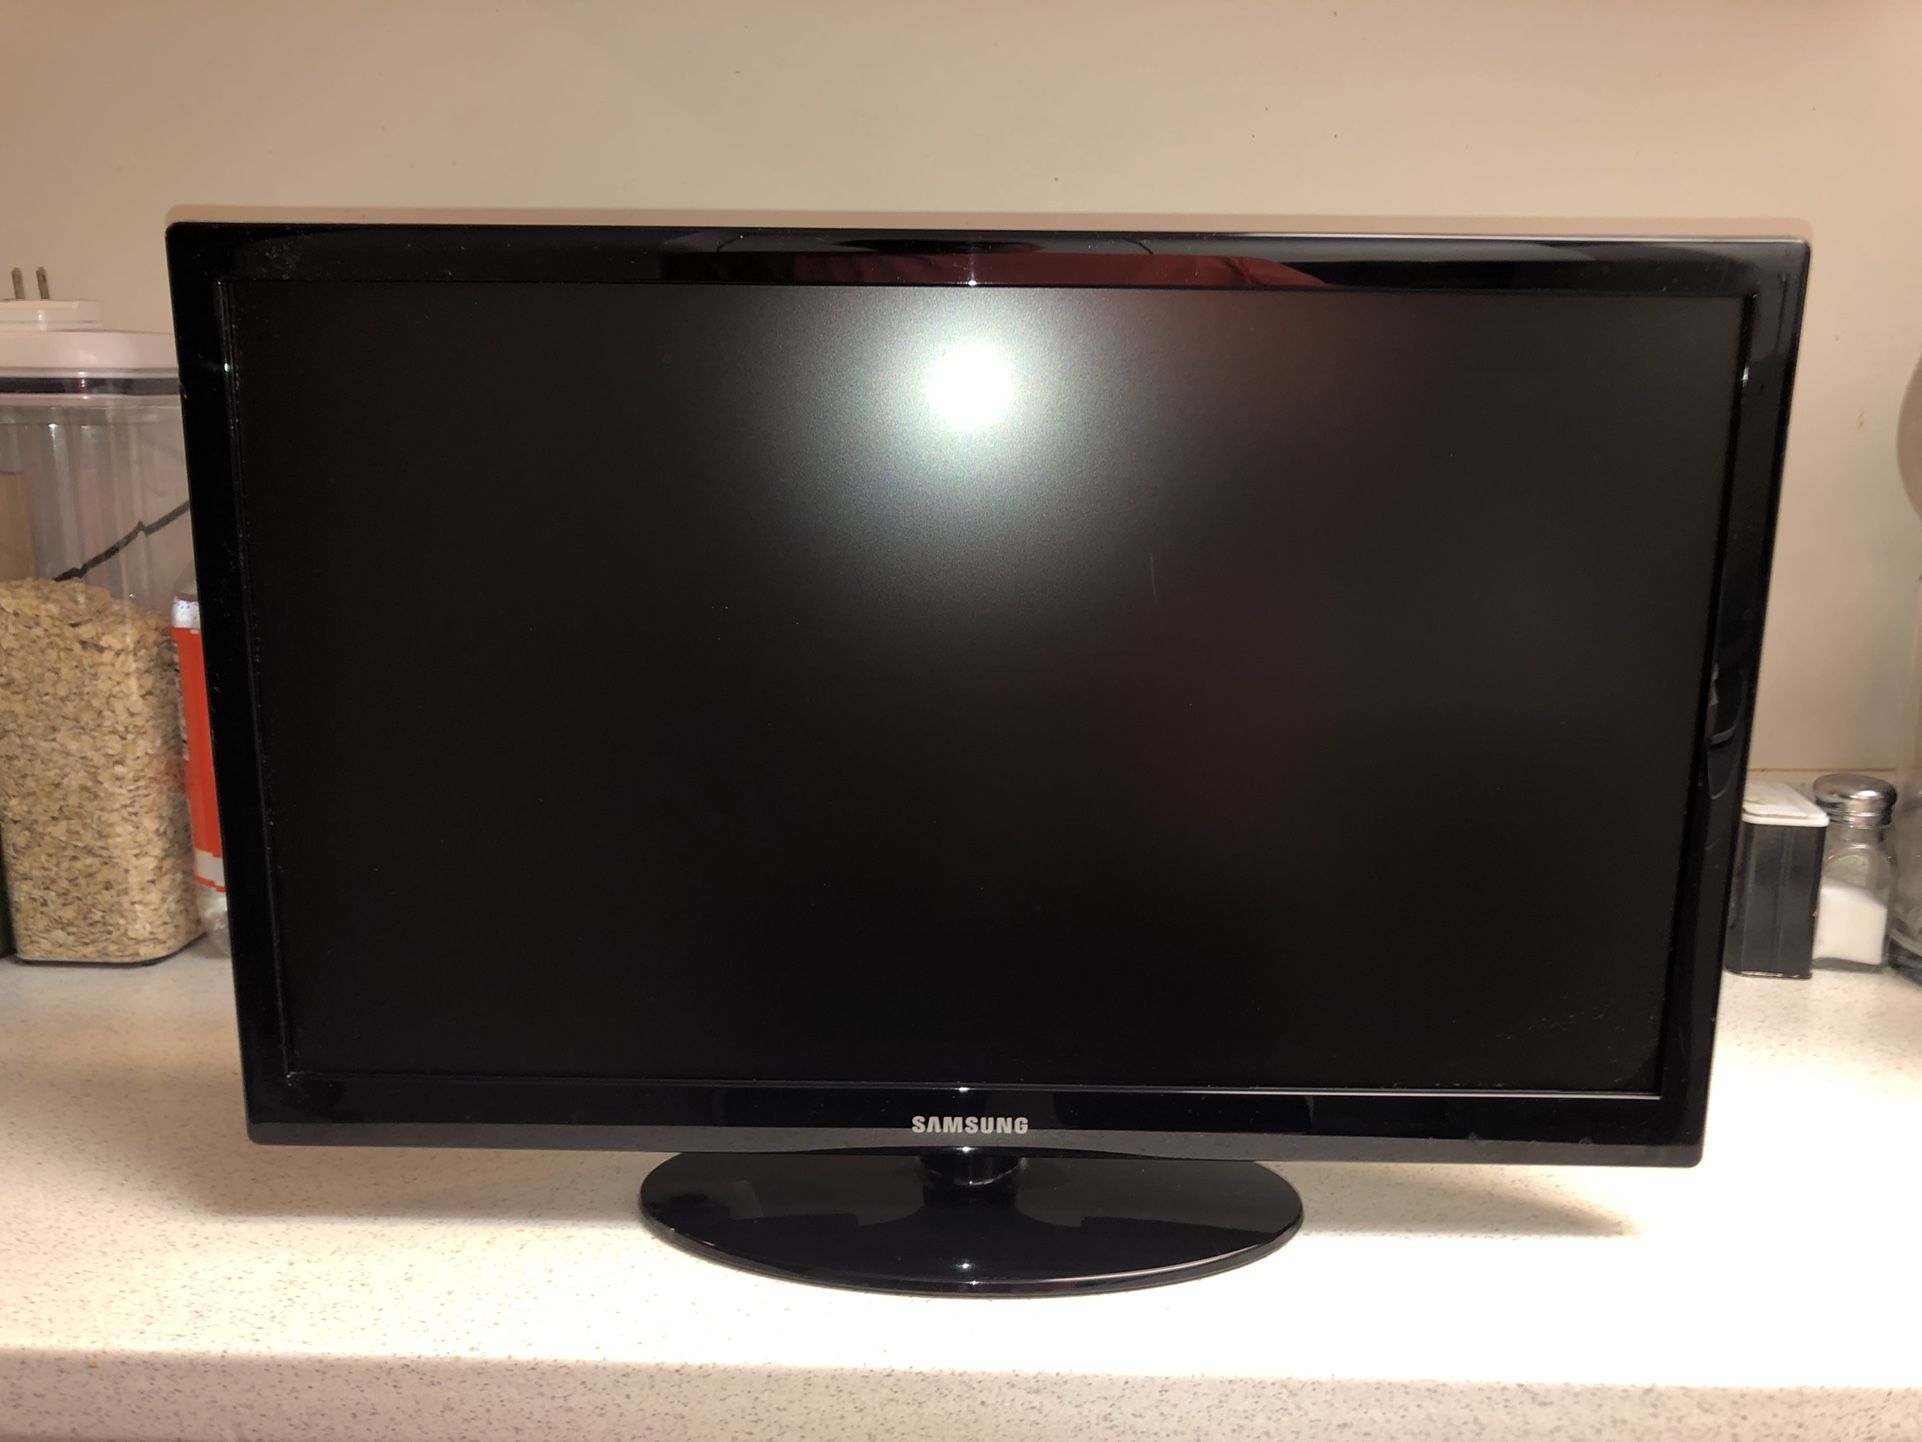 Samsung 22-inch LED LCD TV/Monitor w/ remote